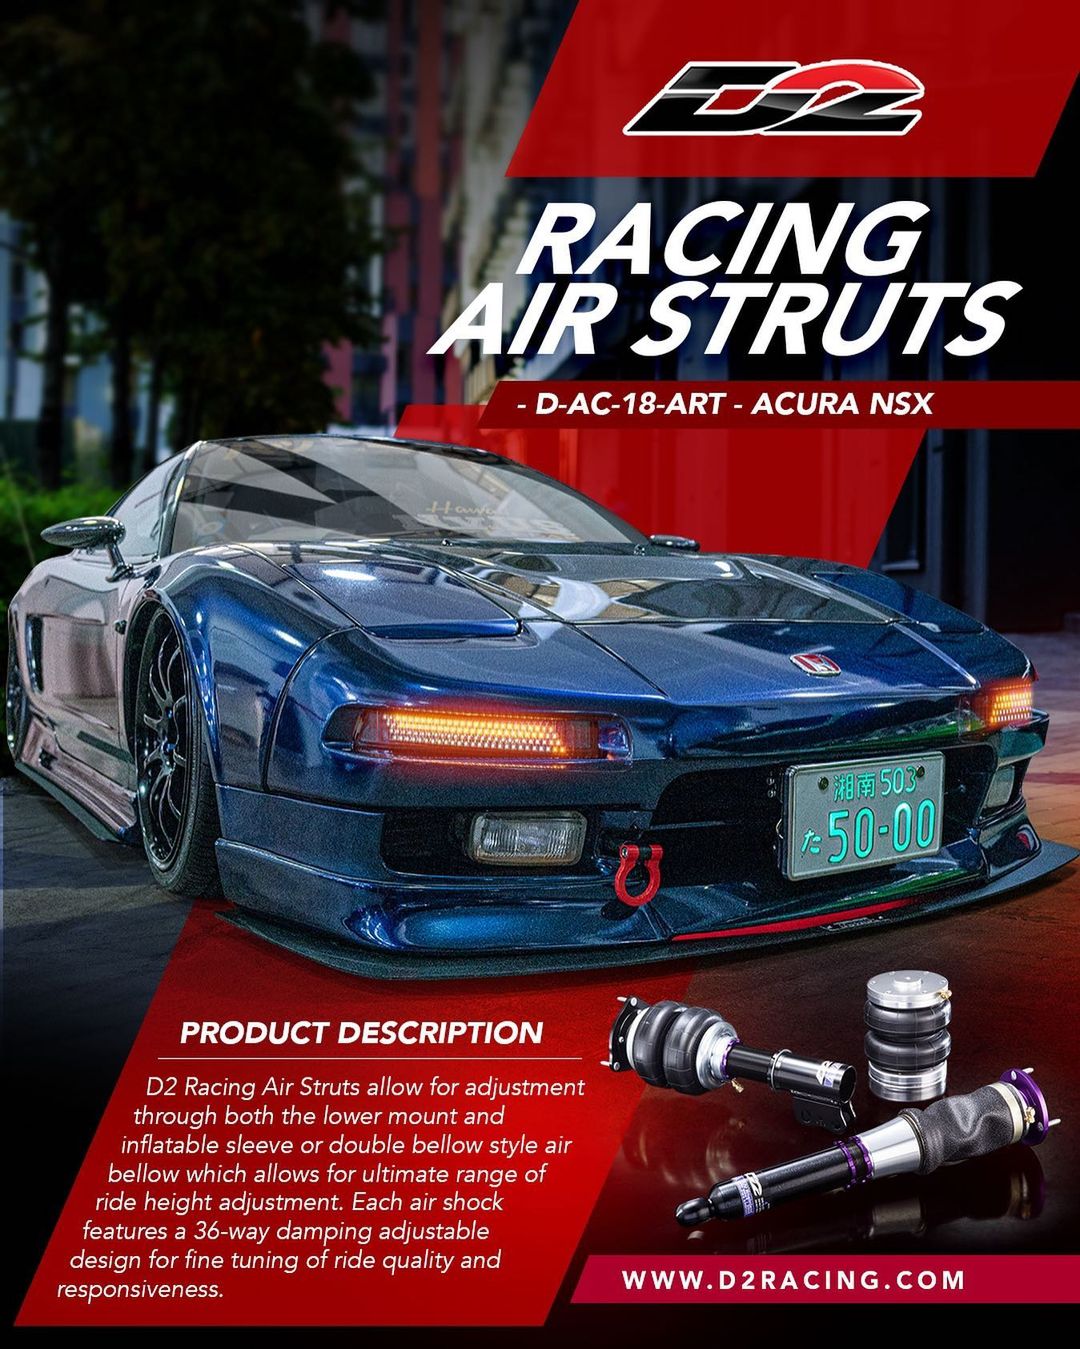 Give Your Ride a Boost – D2 Racing Delivers Top-Notch Performance Enhancements!